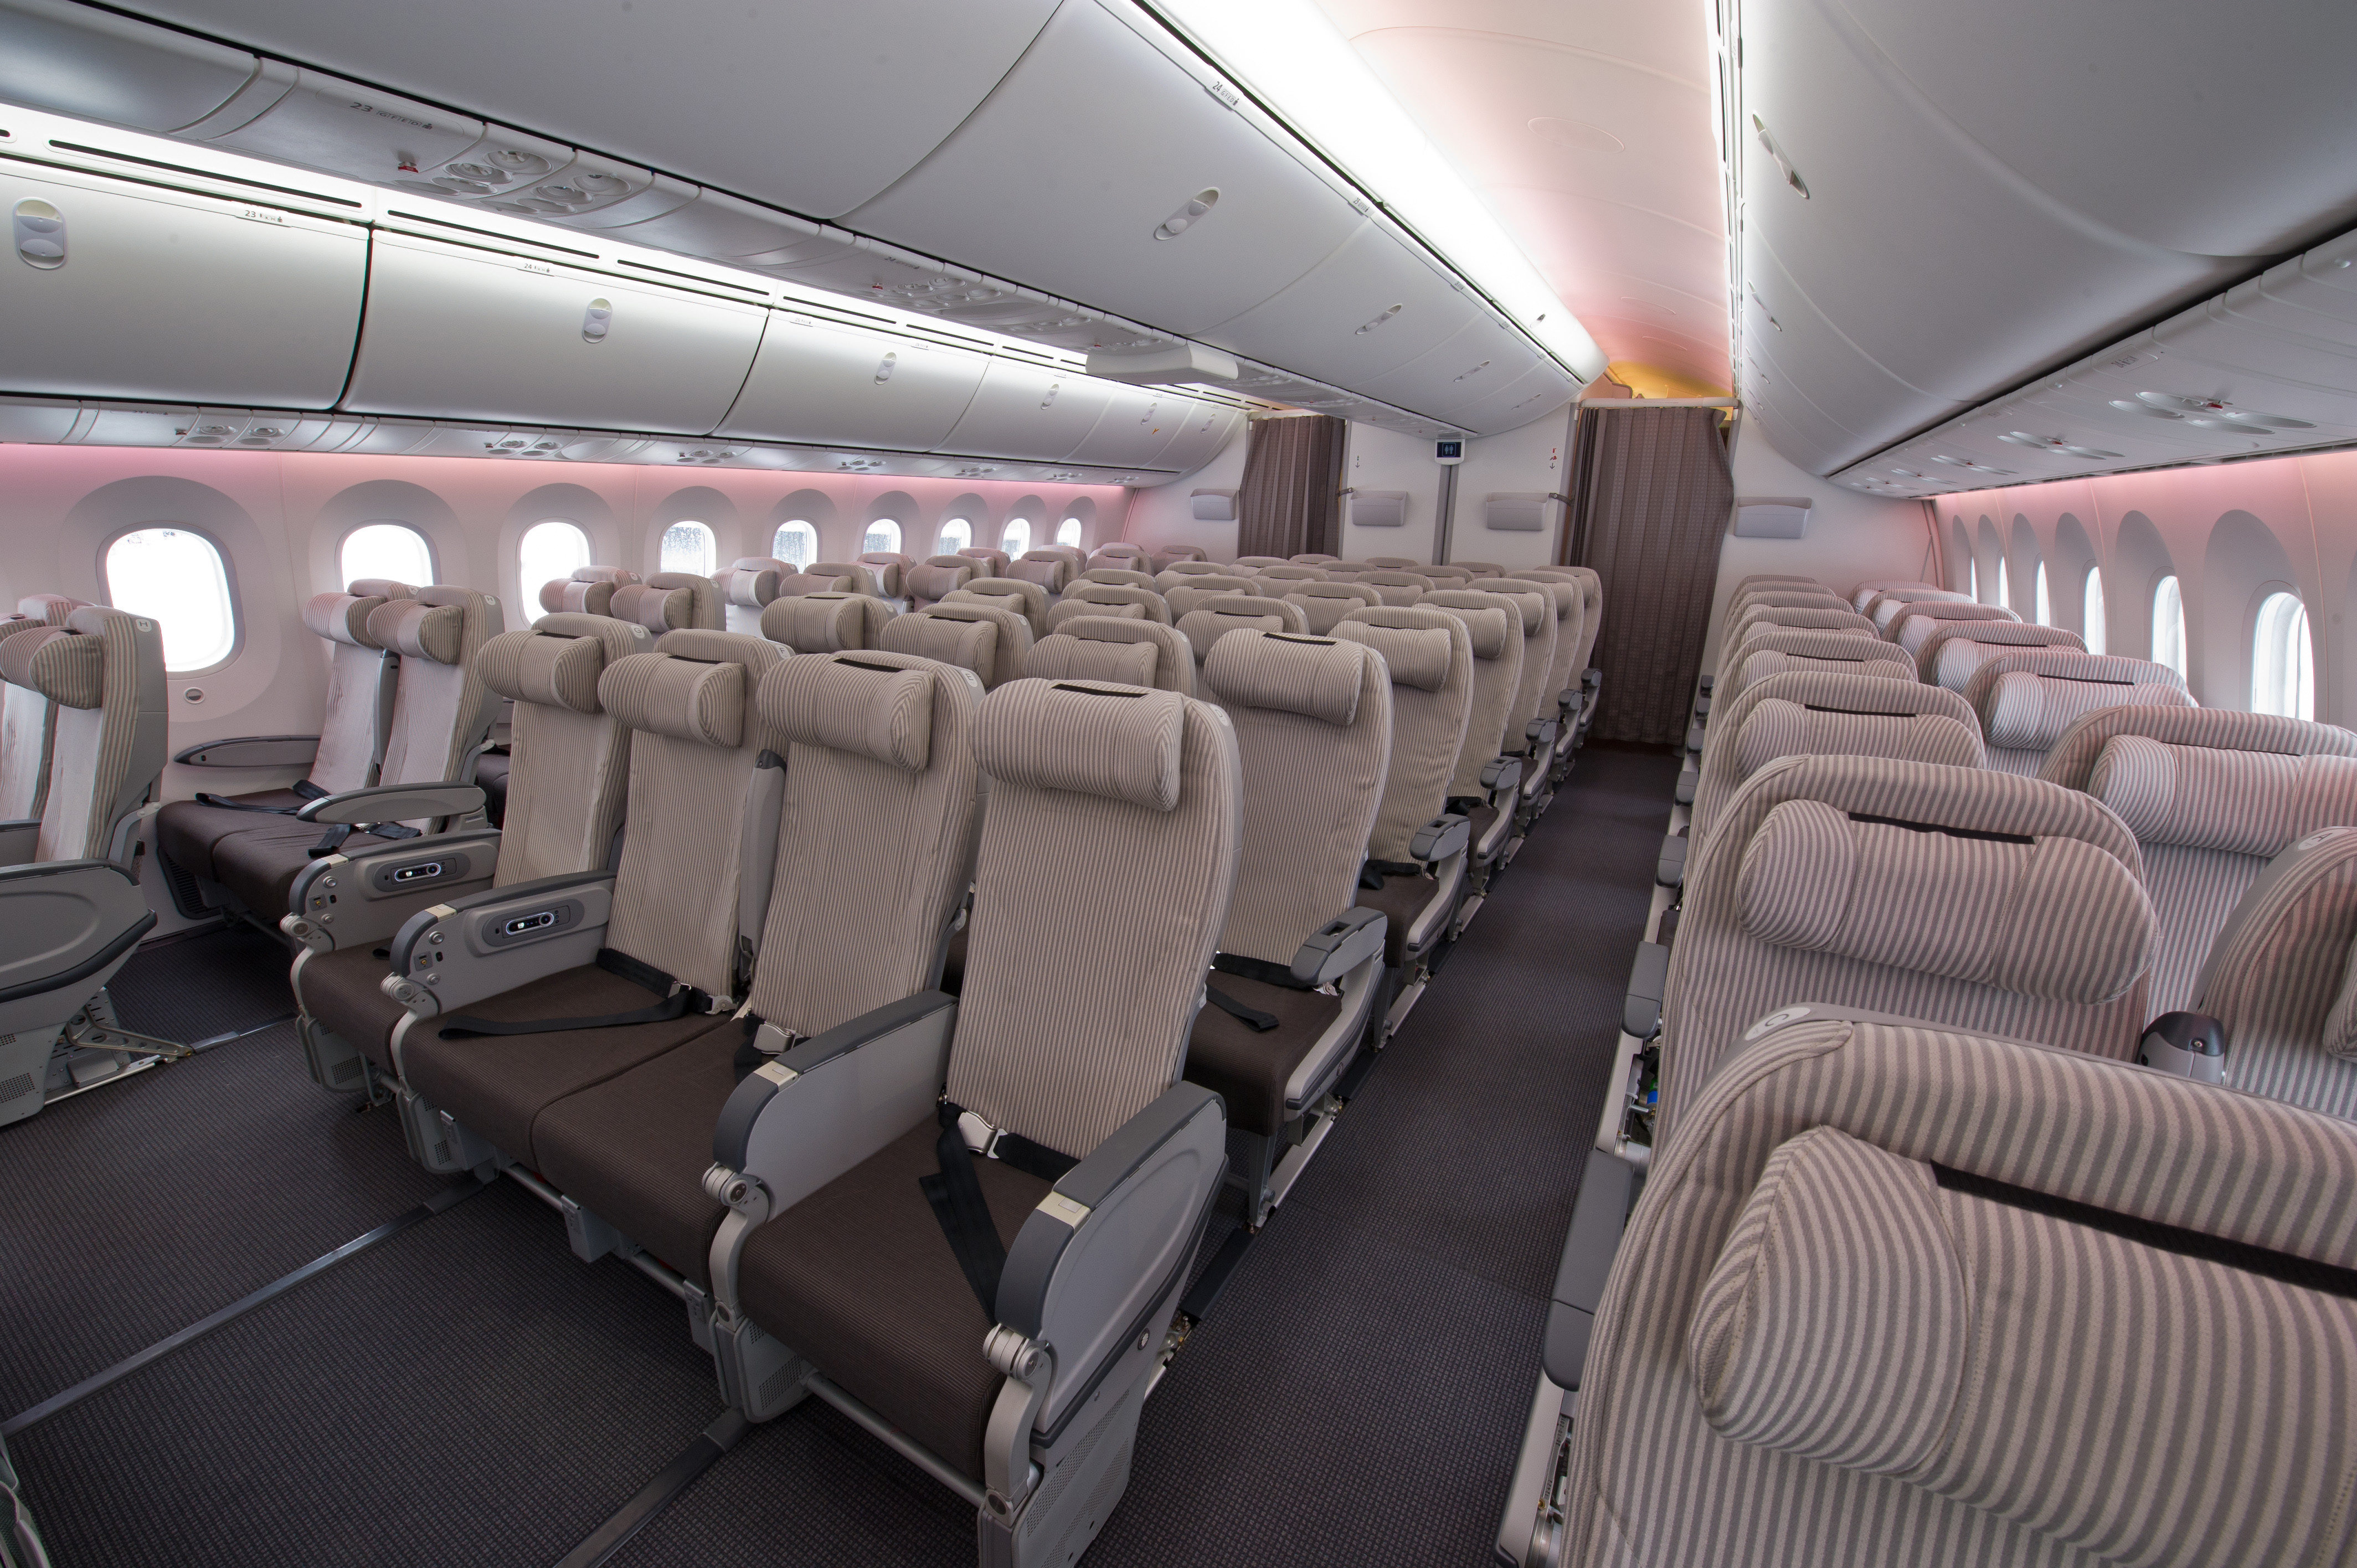 Japan Airlines To Take Delivery Of Their First Dreamliner On March